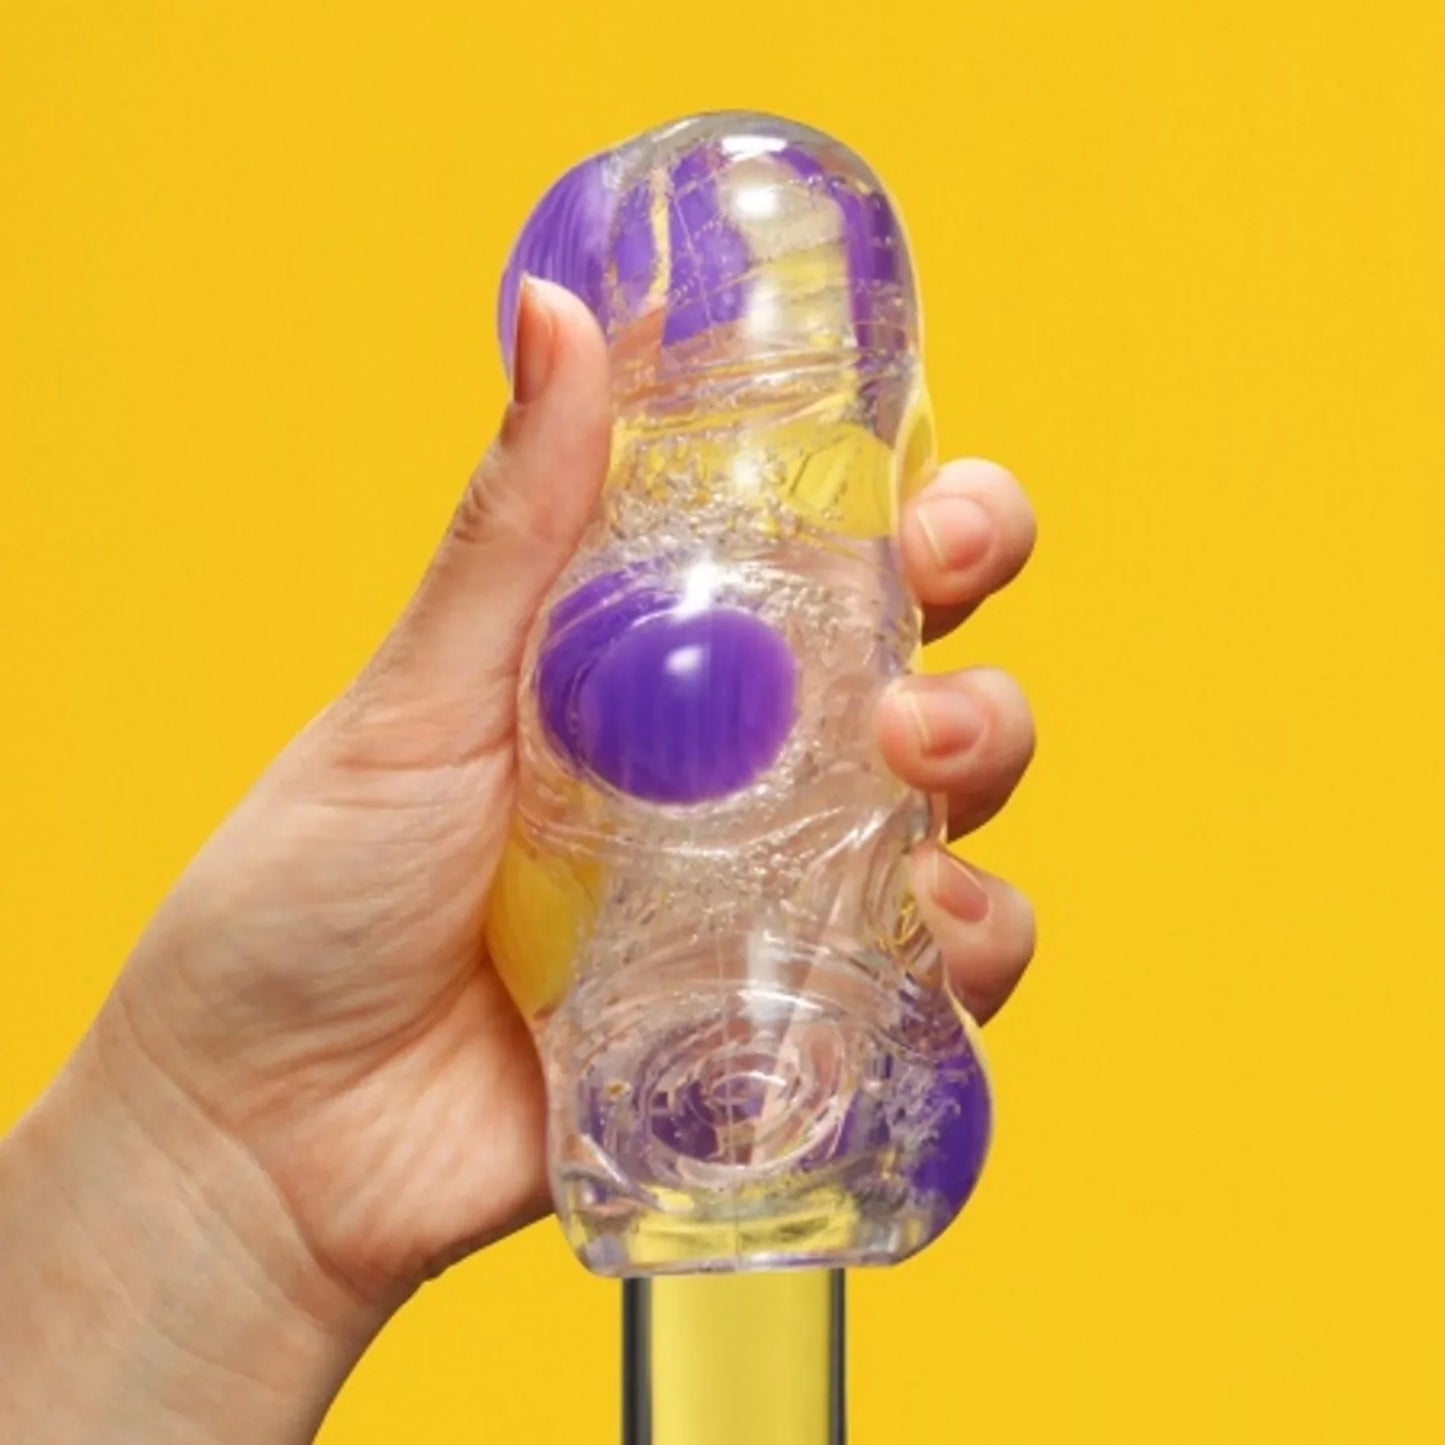 Tenga Bobble Magic Marbles Stroker - Thorn & Feather Sex Toy Canada